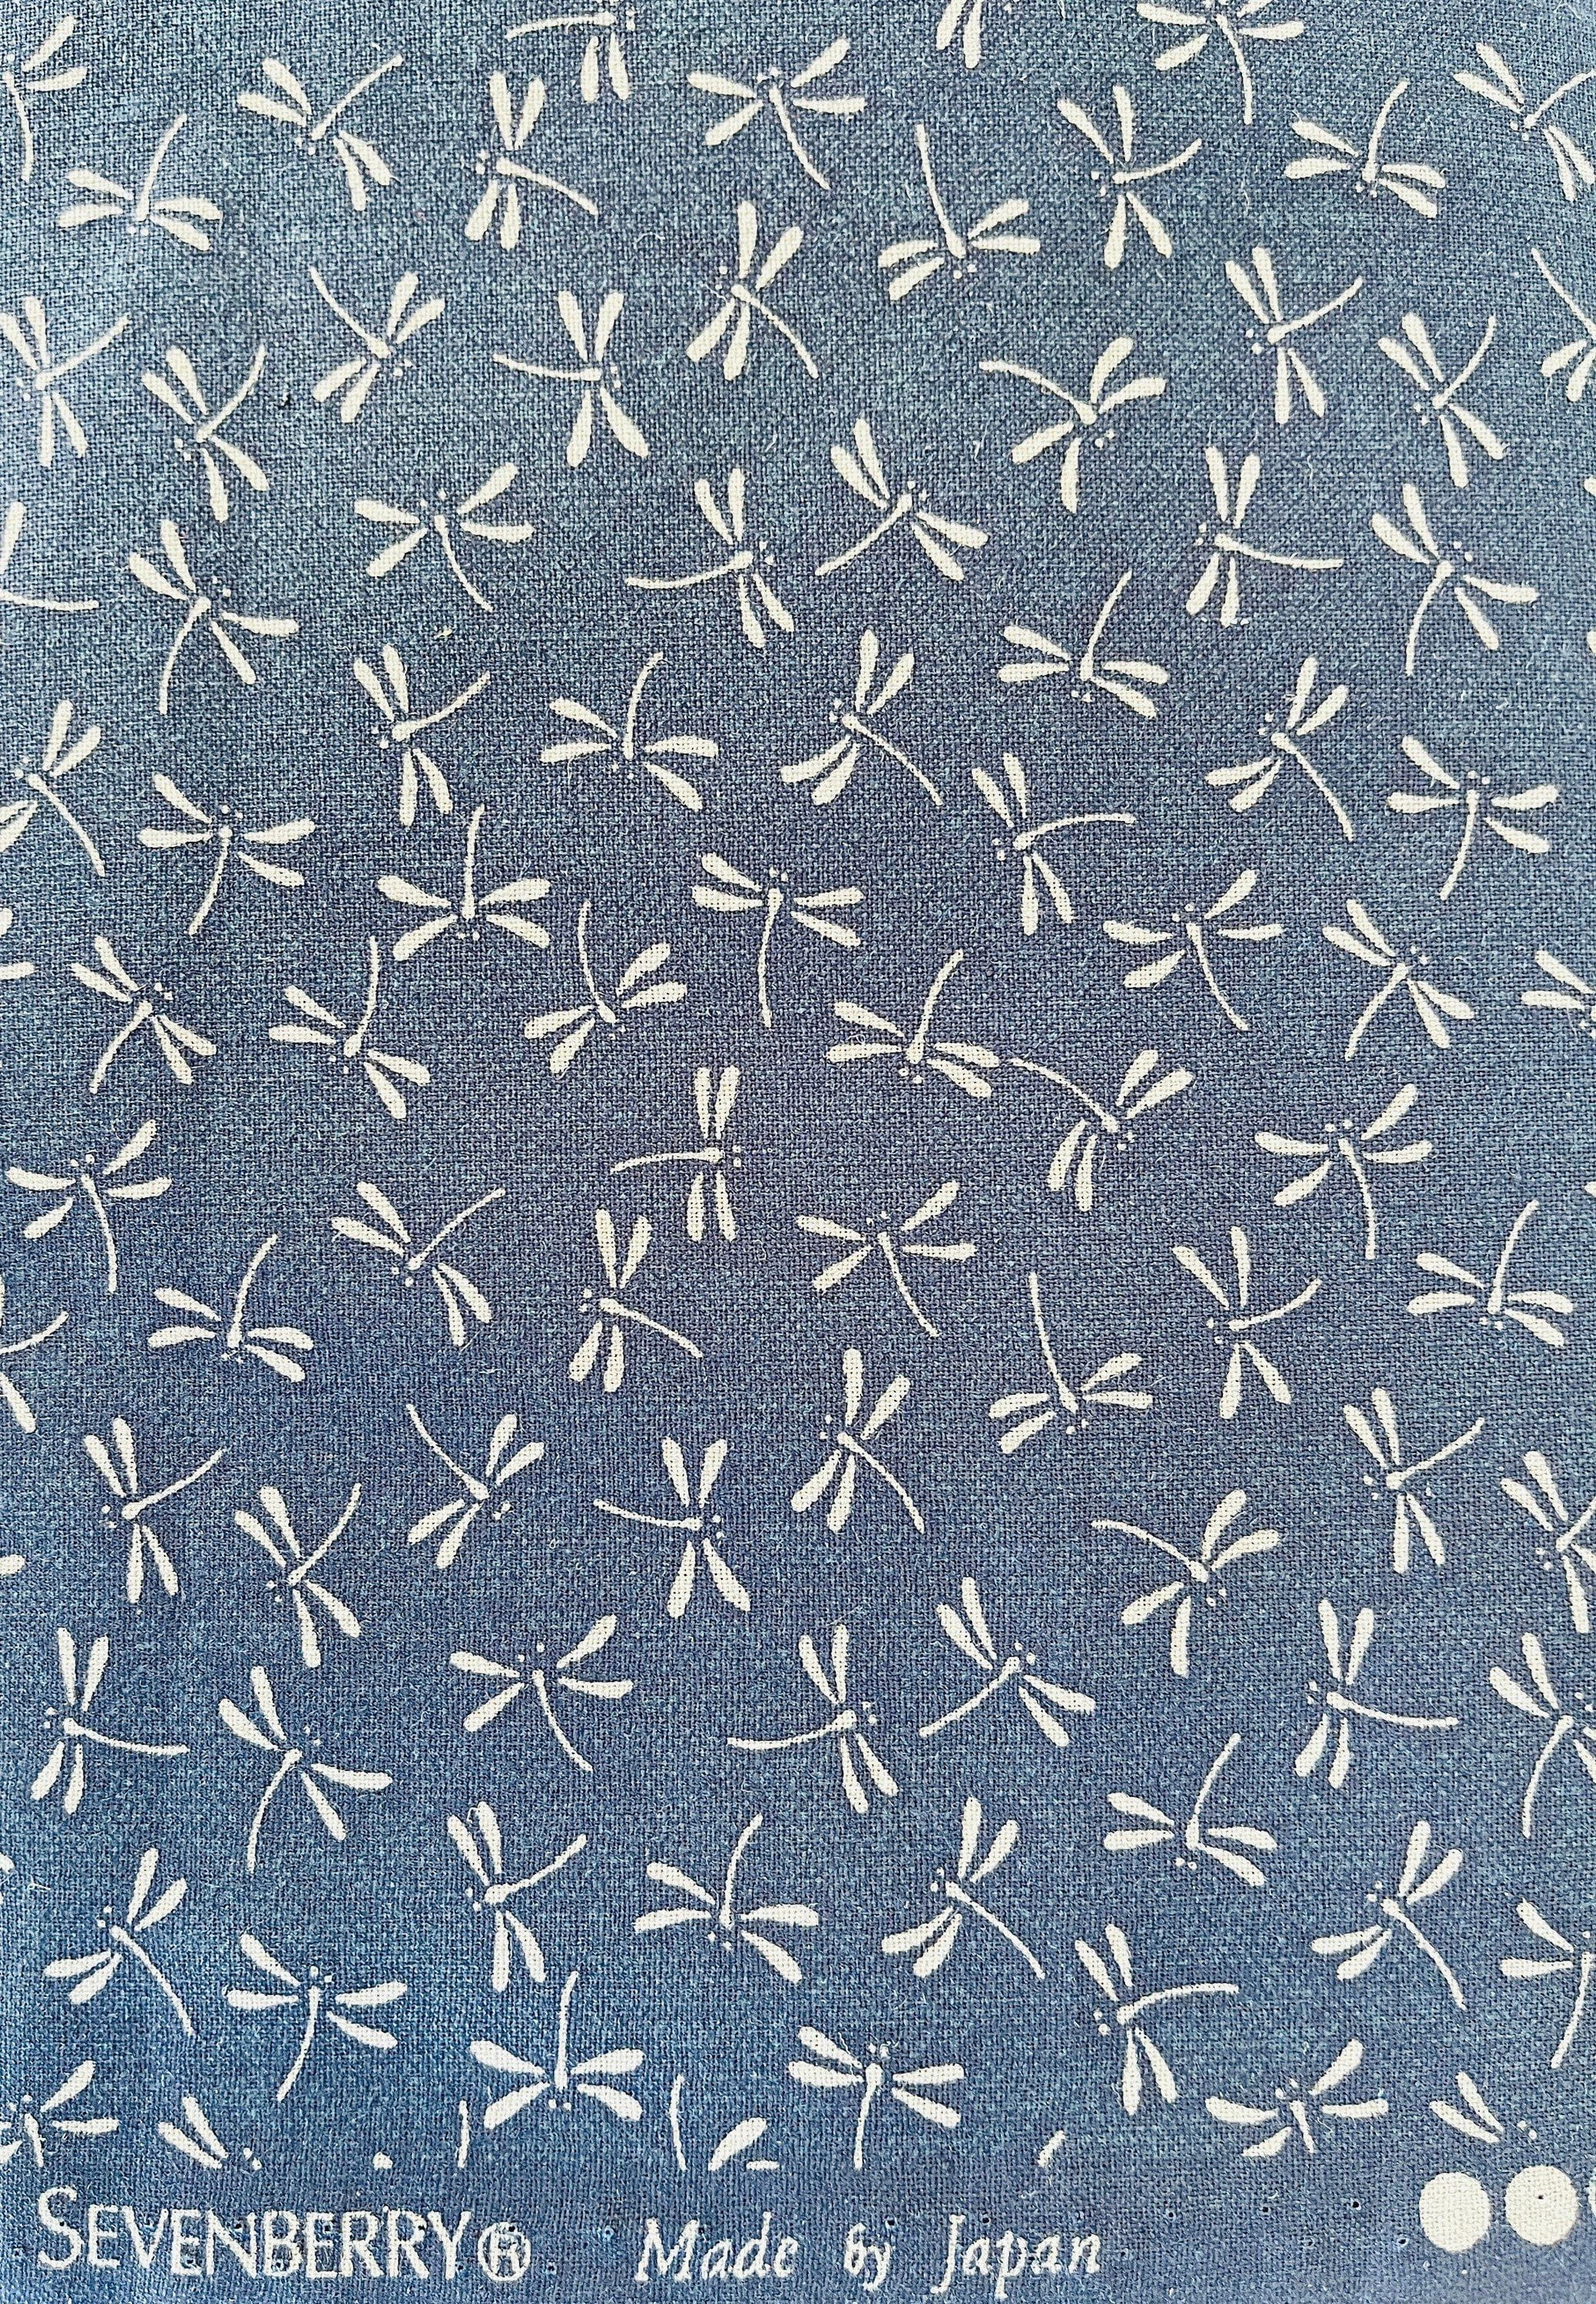 Dragonfly - Dragonfly Fabric - Westex - Sevenberry - Japanese Textile